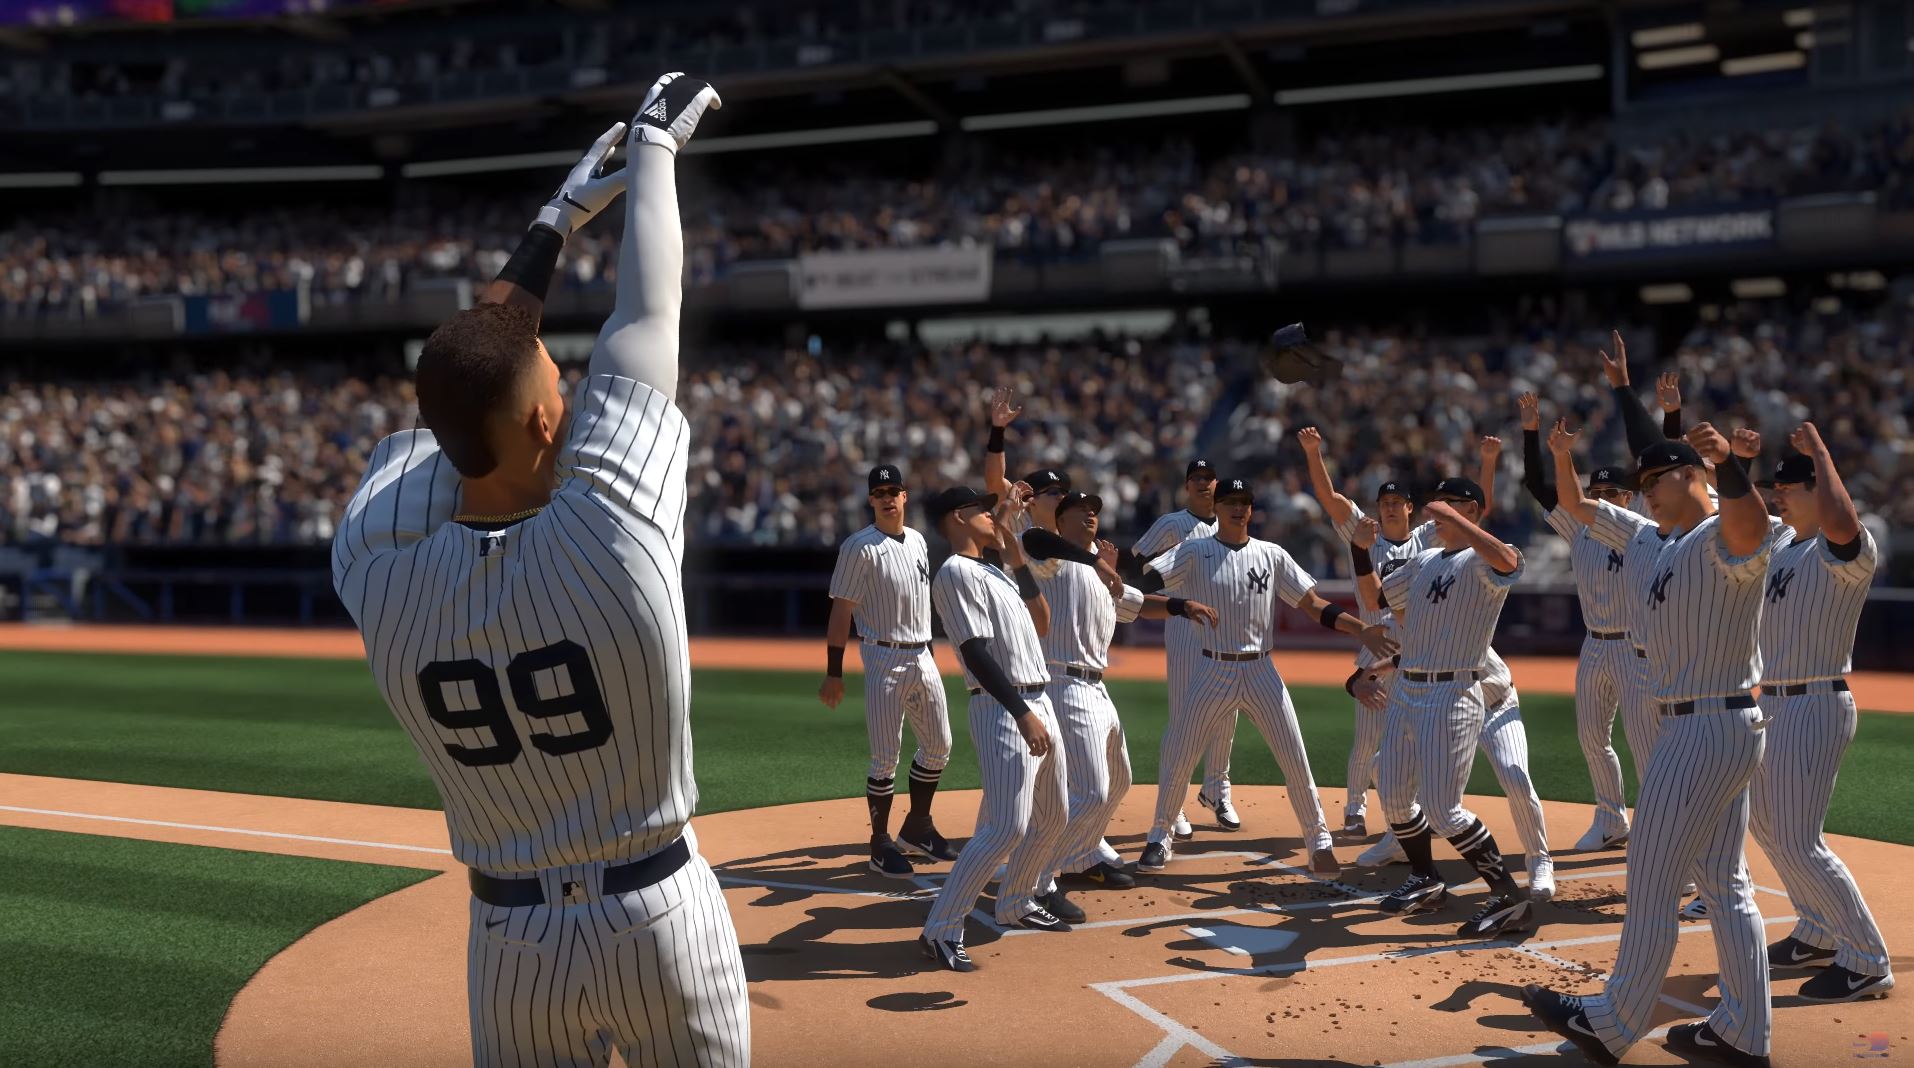 mlb-the-show-21-gameplay-trailer-4K-3.